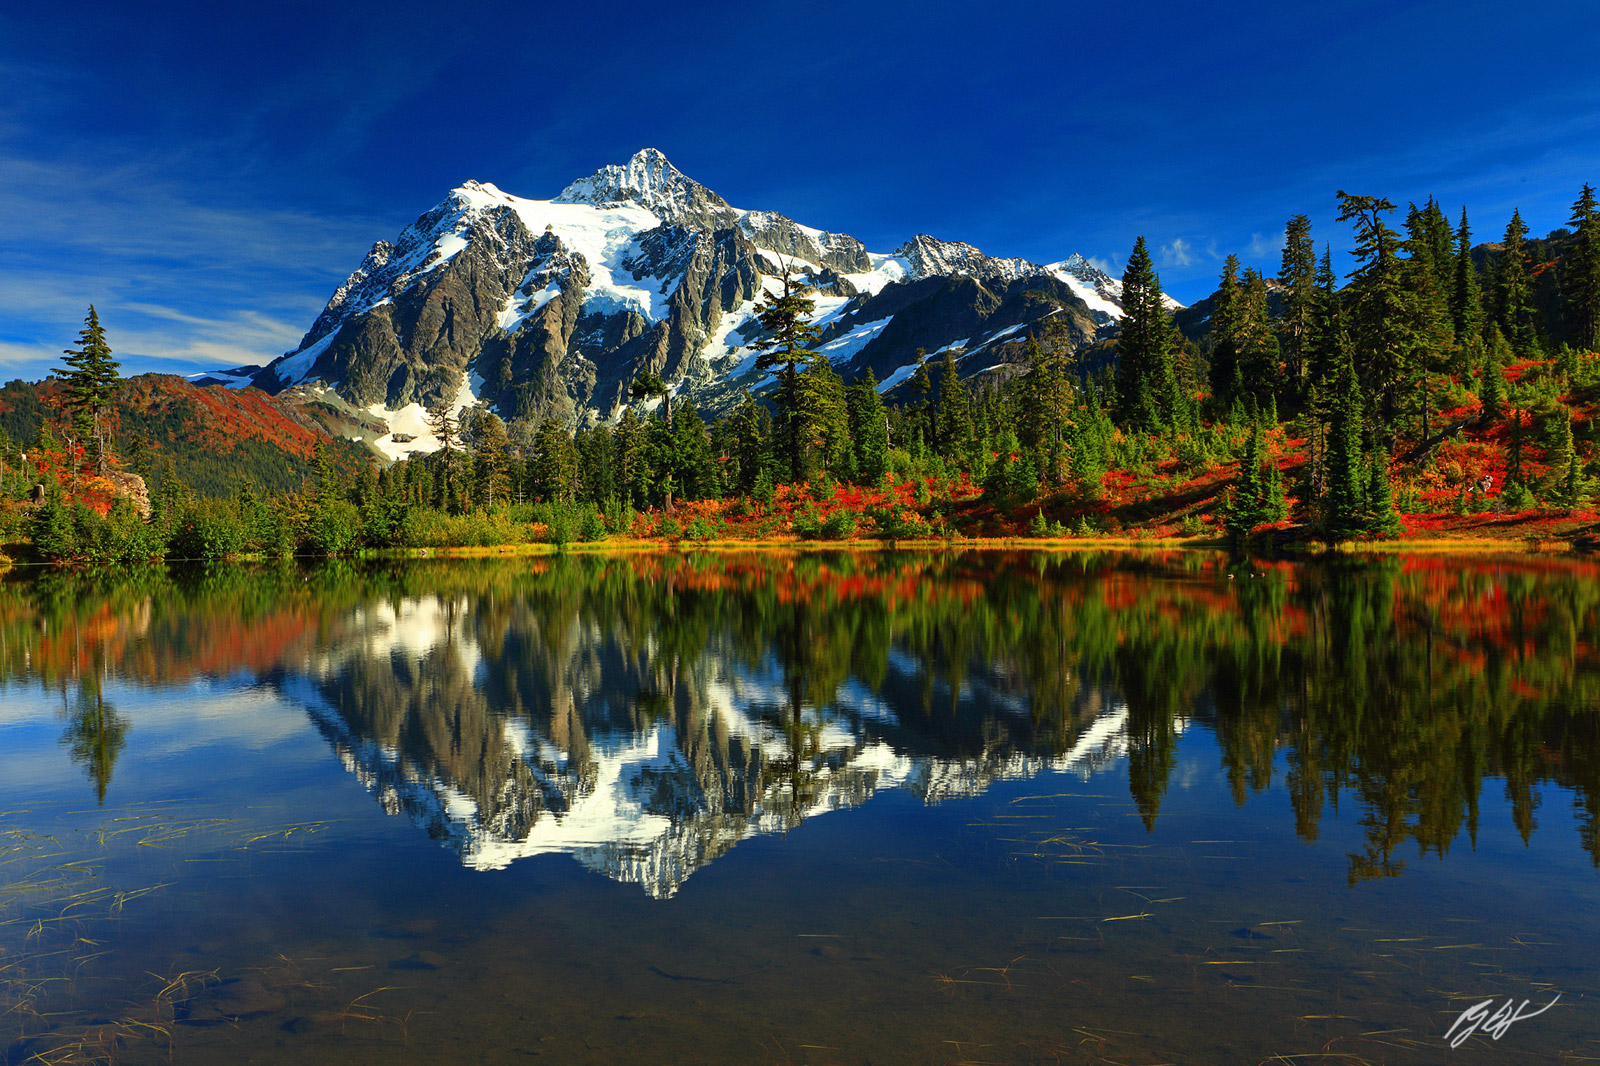 Mt Shuksan Reflected in Picture Lake in Heather Meadows in the Mt Baker-Snoqualmie National Forest in Washington